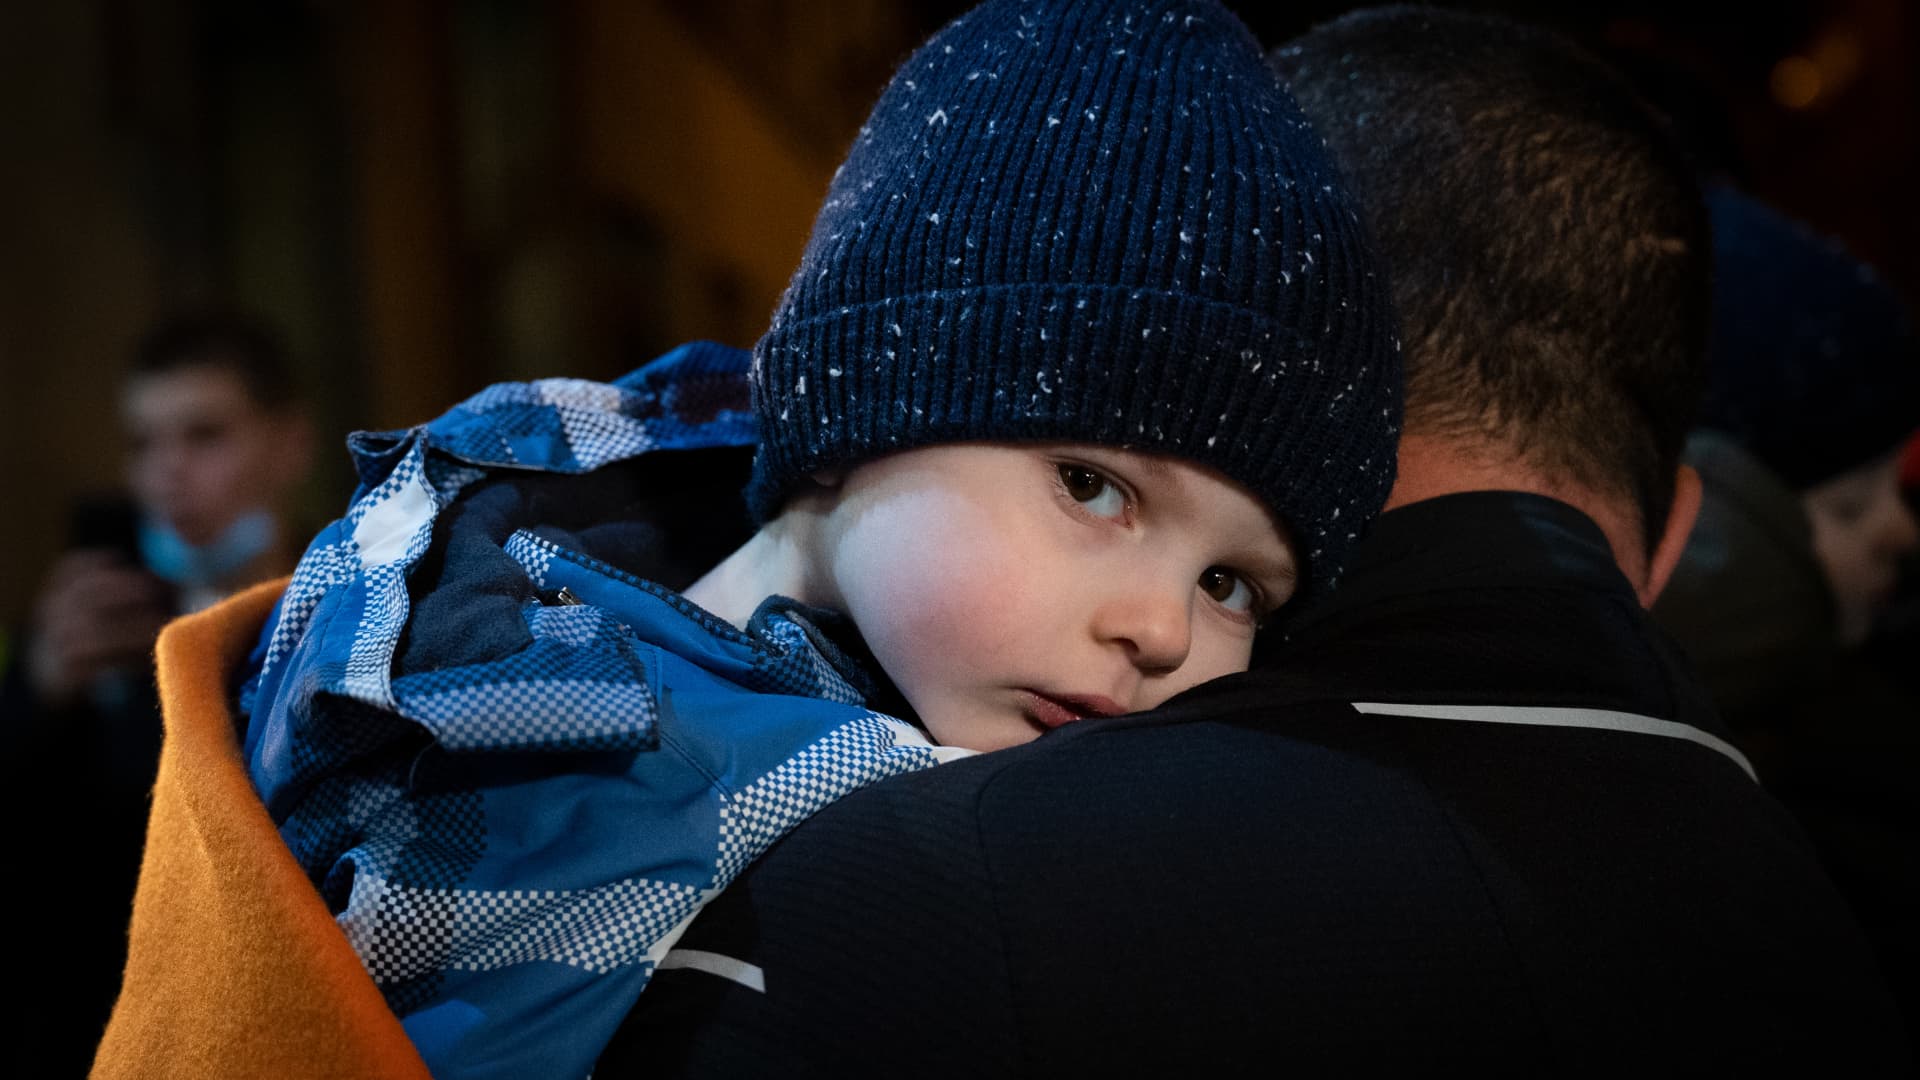 A taxi driver takes a Ukrainian refugee child in his arms from his taxi as they arrive to Madrid. A convoy of taxis traveled from Madrid to the Polish-Ukrainian border carrying humanitarian aid and bringing back Ukrainian families fleeing Russia's invasion of Ukraine, in total 133 refugees, of which 60 are children. The convoy arrived to the foundation 'Mensajeros de la Paz', which will provide them accommodation.